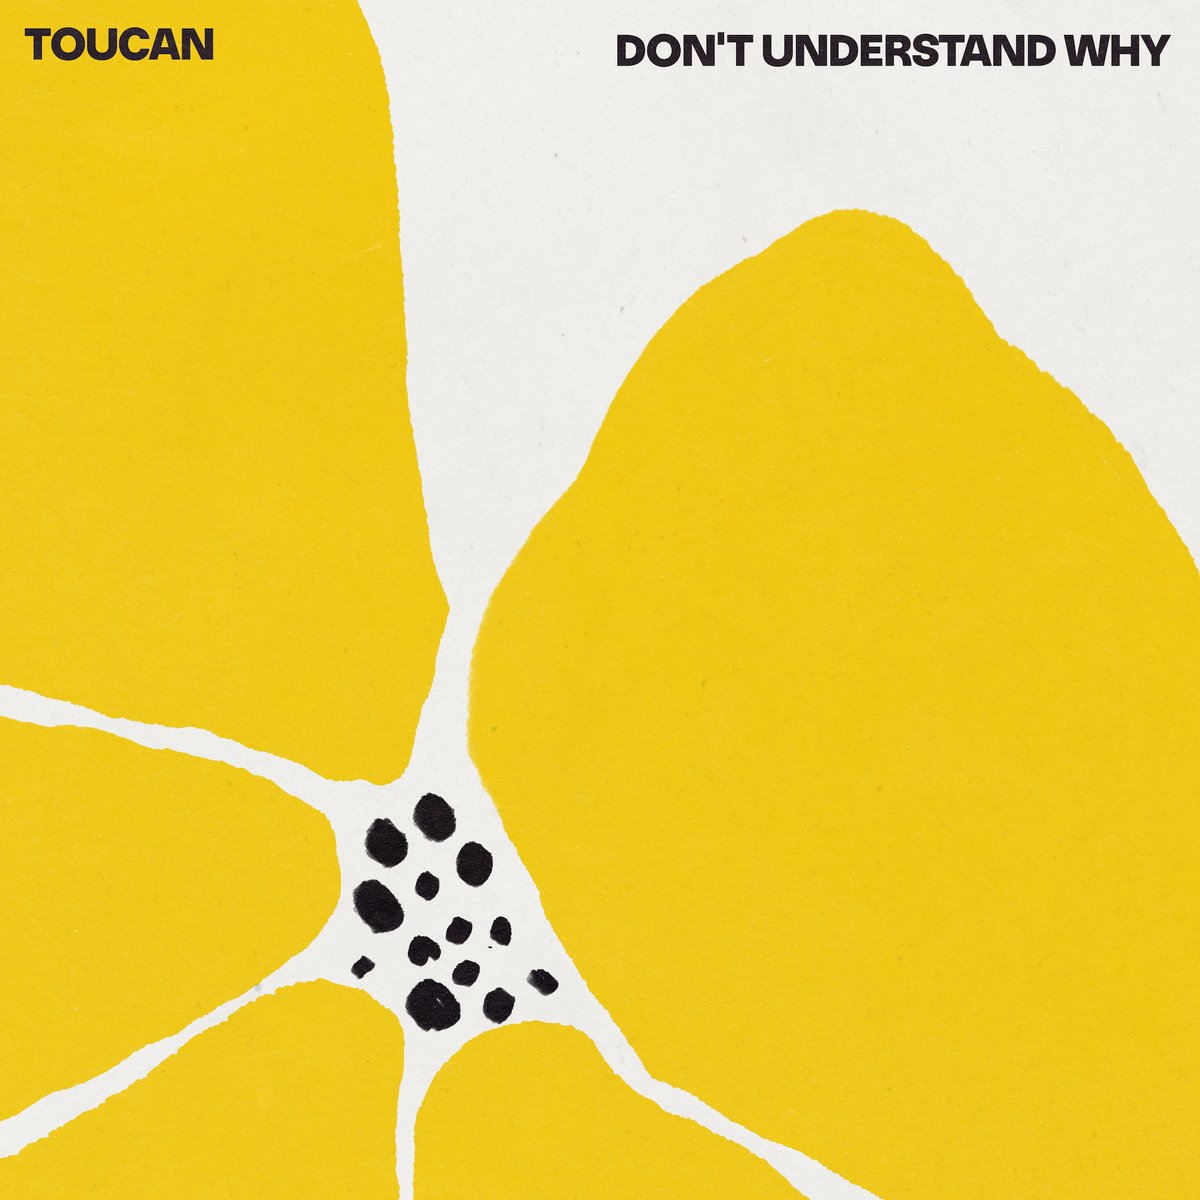 Listen to the album 'Don't Understand Why' and appreciate the talent of the promising artist TOUCAN. #indiedockmusicblog #soul eu1.hubs.ly/H098ZN60